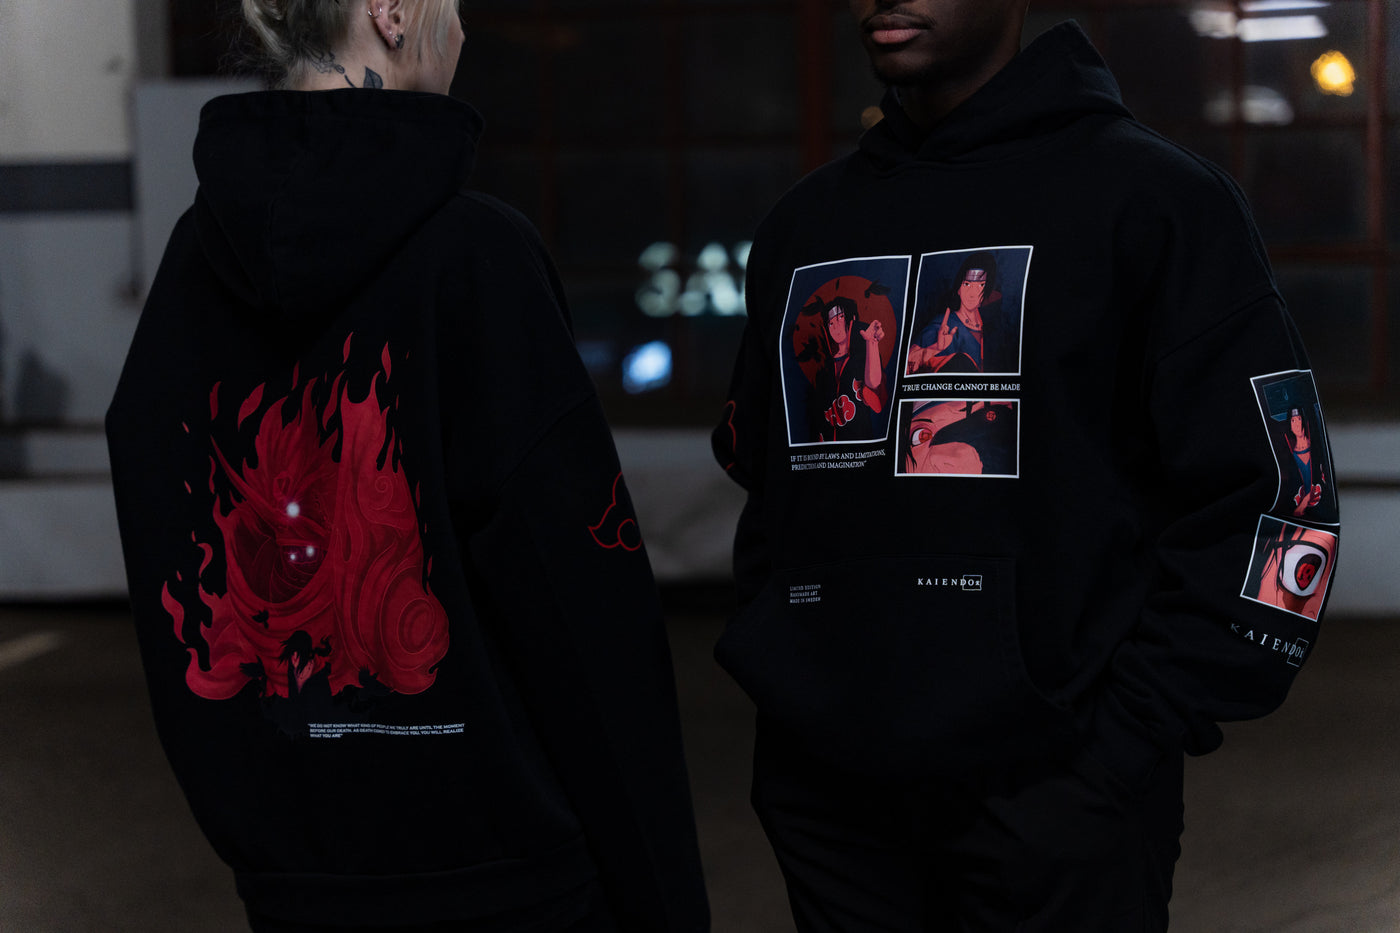 Two people wearing black hoodies with red anime graphics on back and sleeves, and stylized character prints on the front, from Kaiendo's anime fashion line